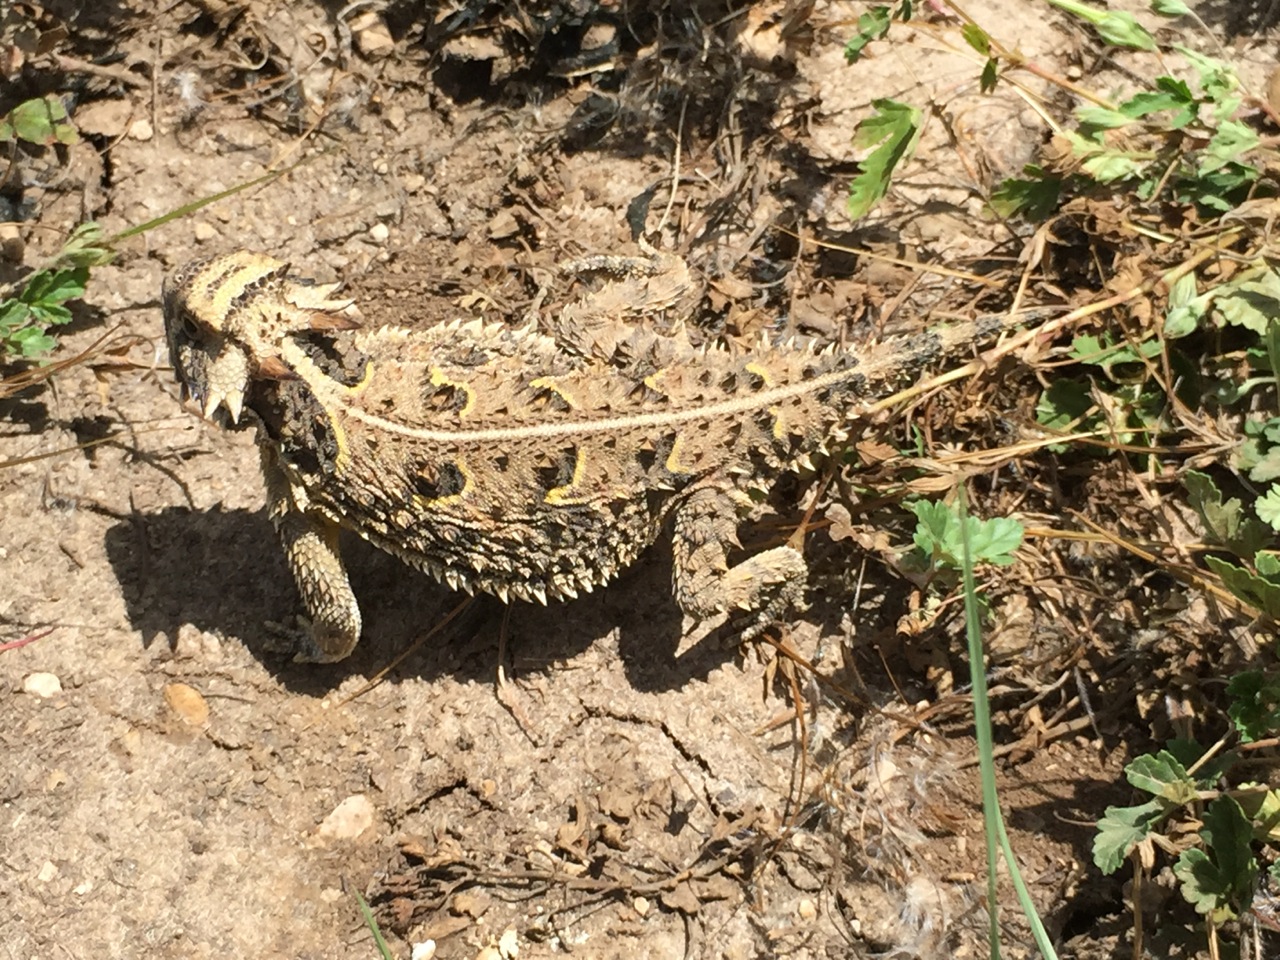 Horned Toad 6-23-15 - We See HT’s Regularly!!!